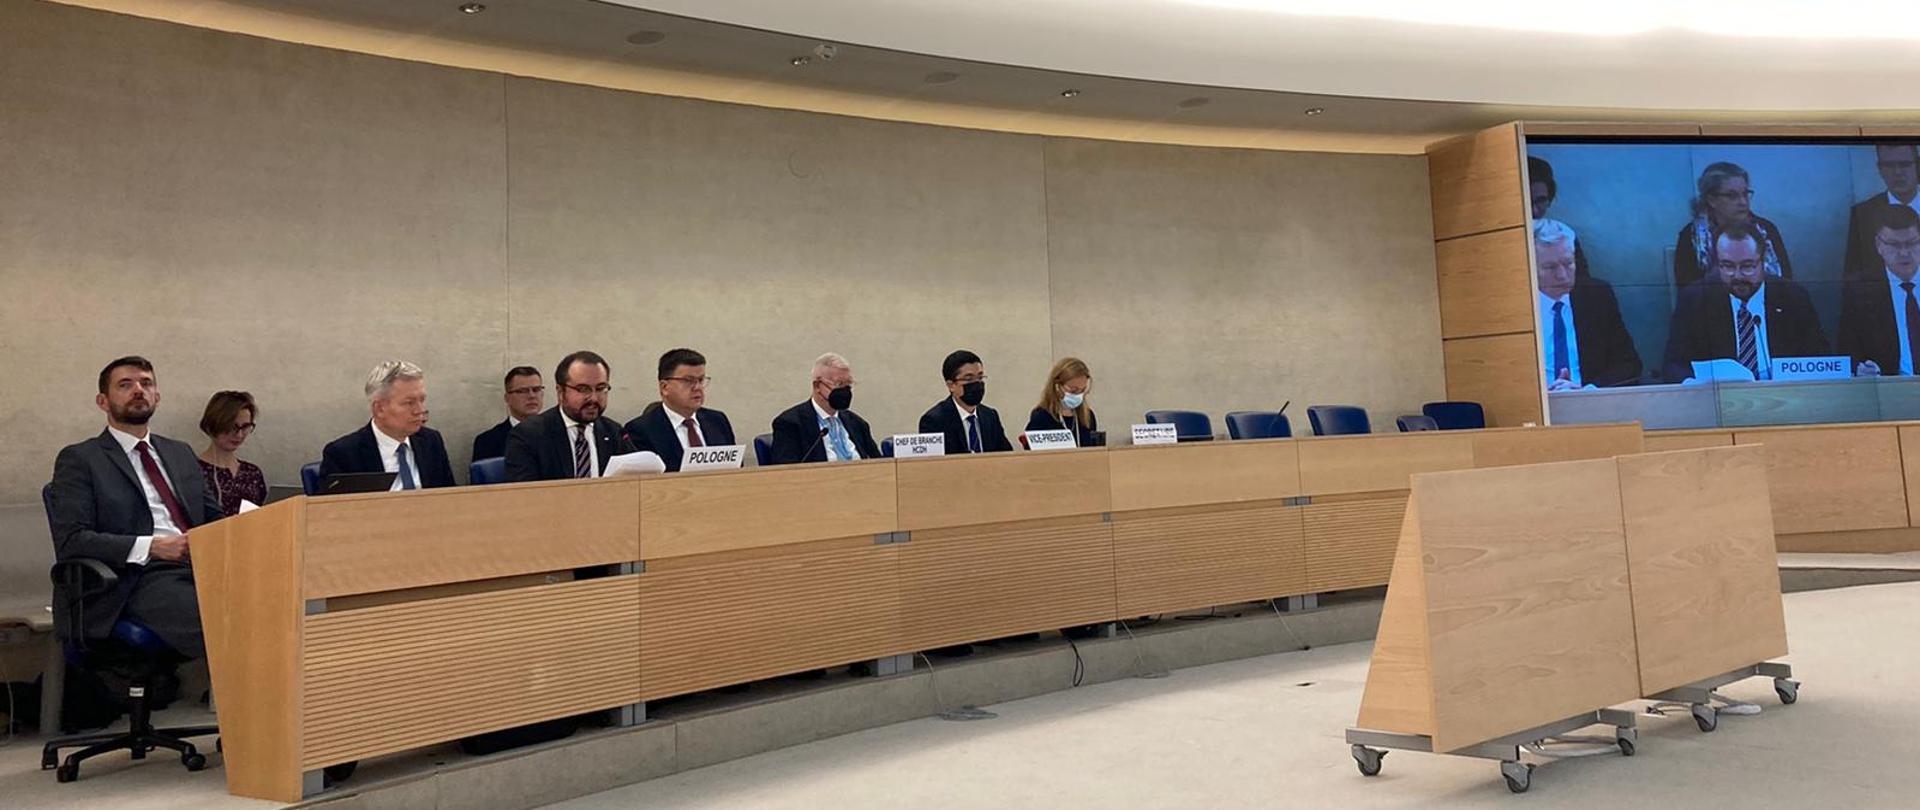 Deputy Minister Jabłoński chaired the 41st session of the Universal Periodic Review (UPR) on Poland during the UN Human Rights Council in Geneva